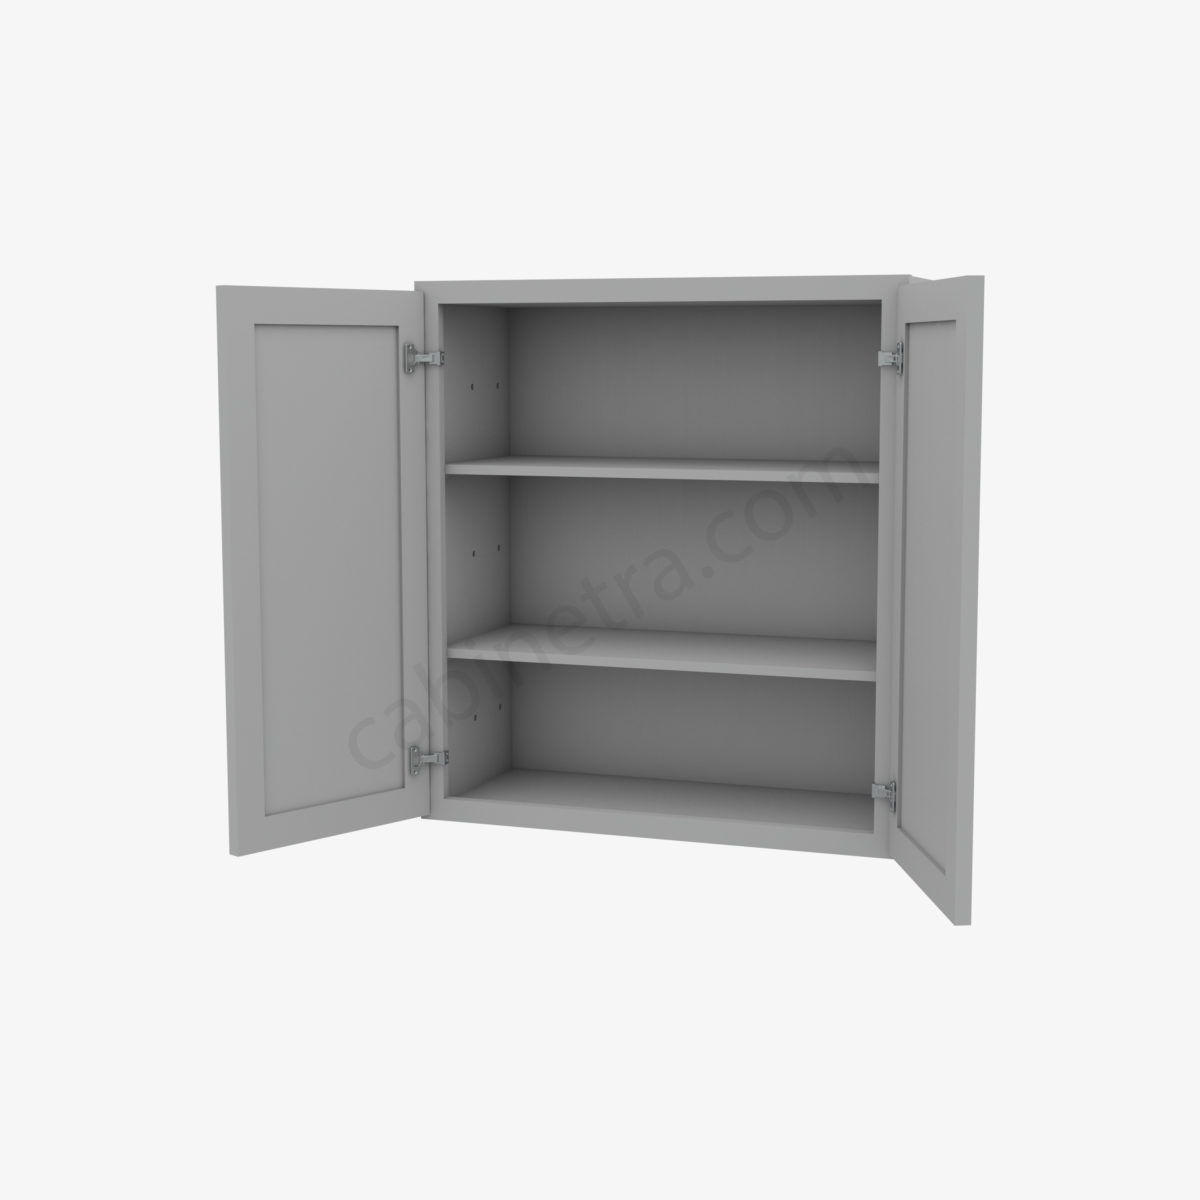 AB W2730B 5 Forevermark Lait Gray Shaker Cabinetra scaled